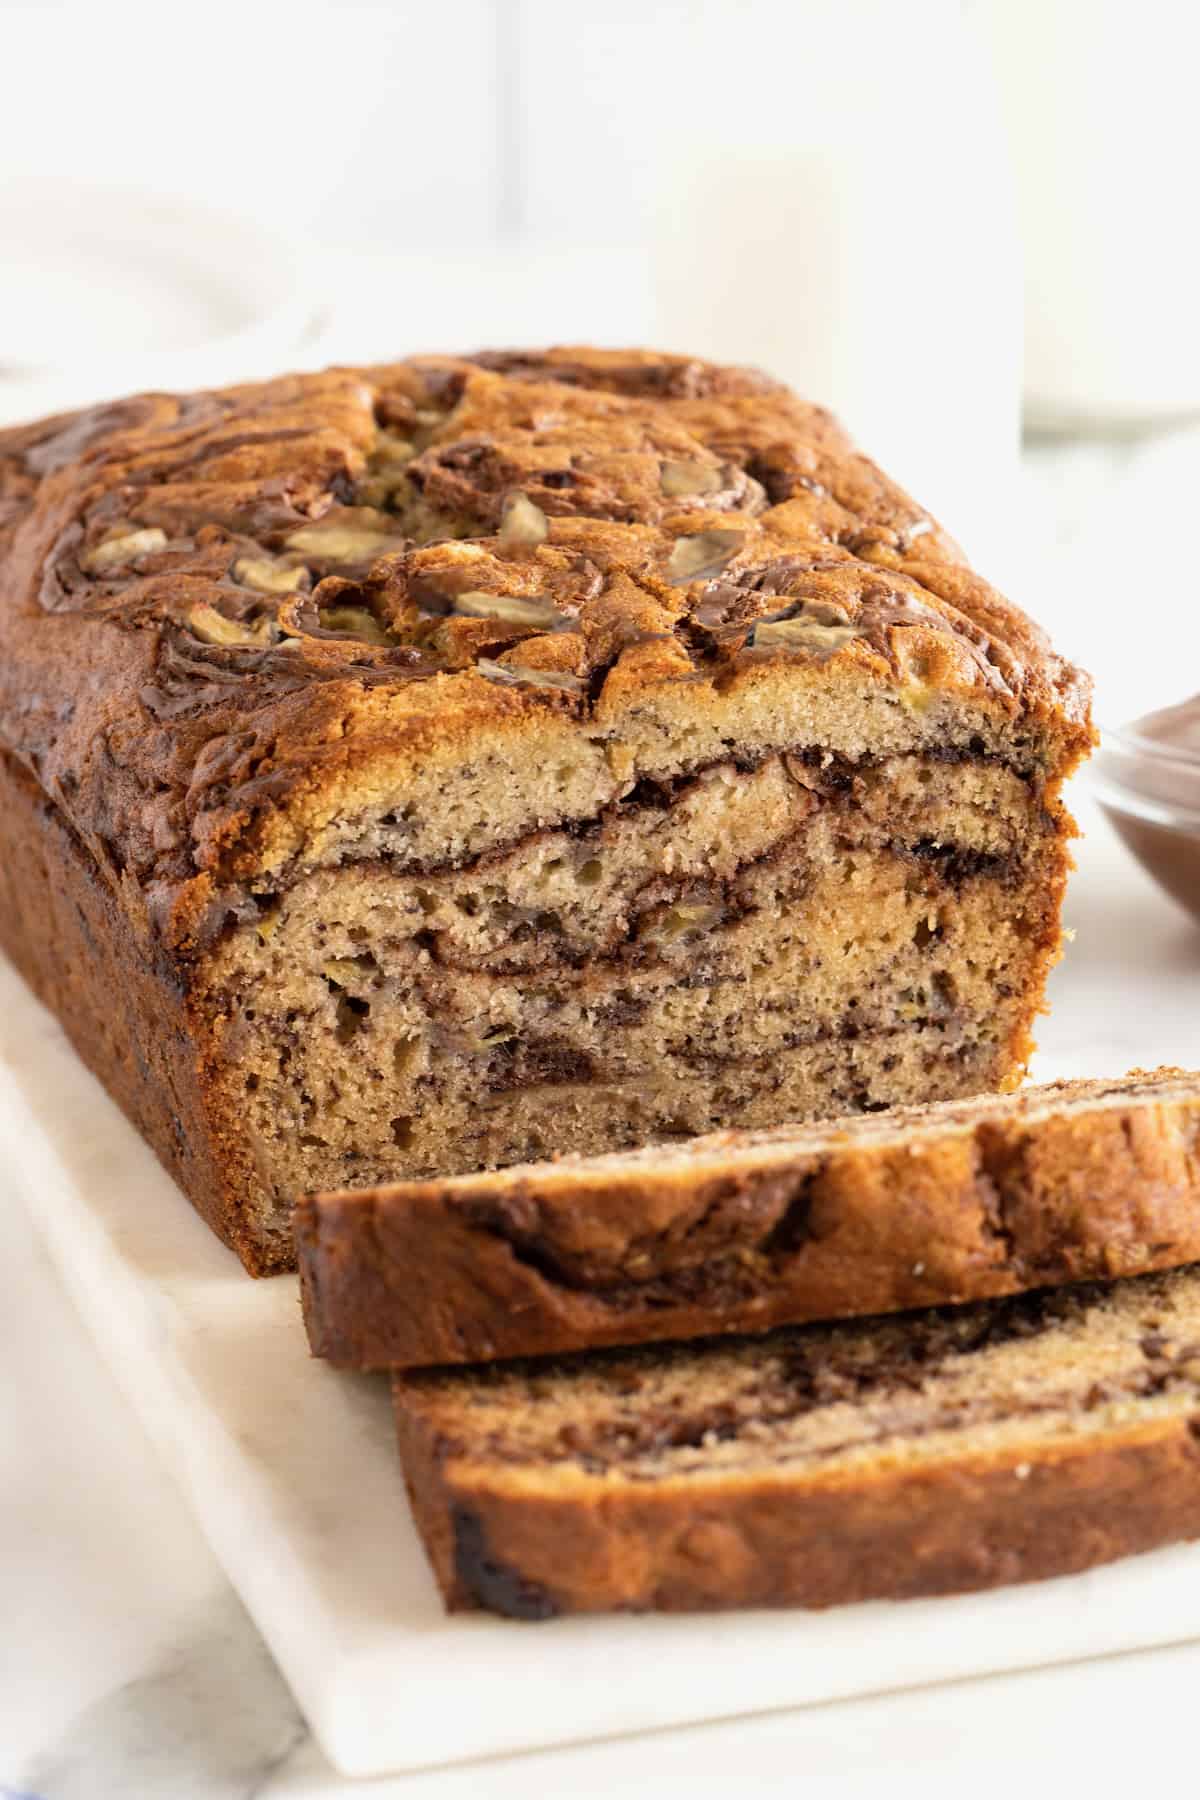 A loaf of Nutella swirled banana bread on a rectangular white serving platter. The bread is sliced, revealing the swirls of Nutella inside.